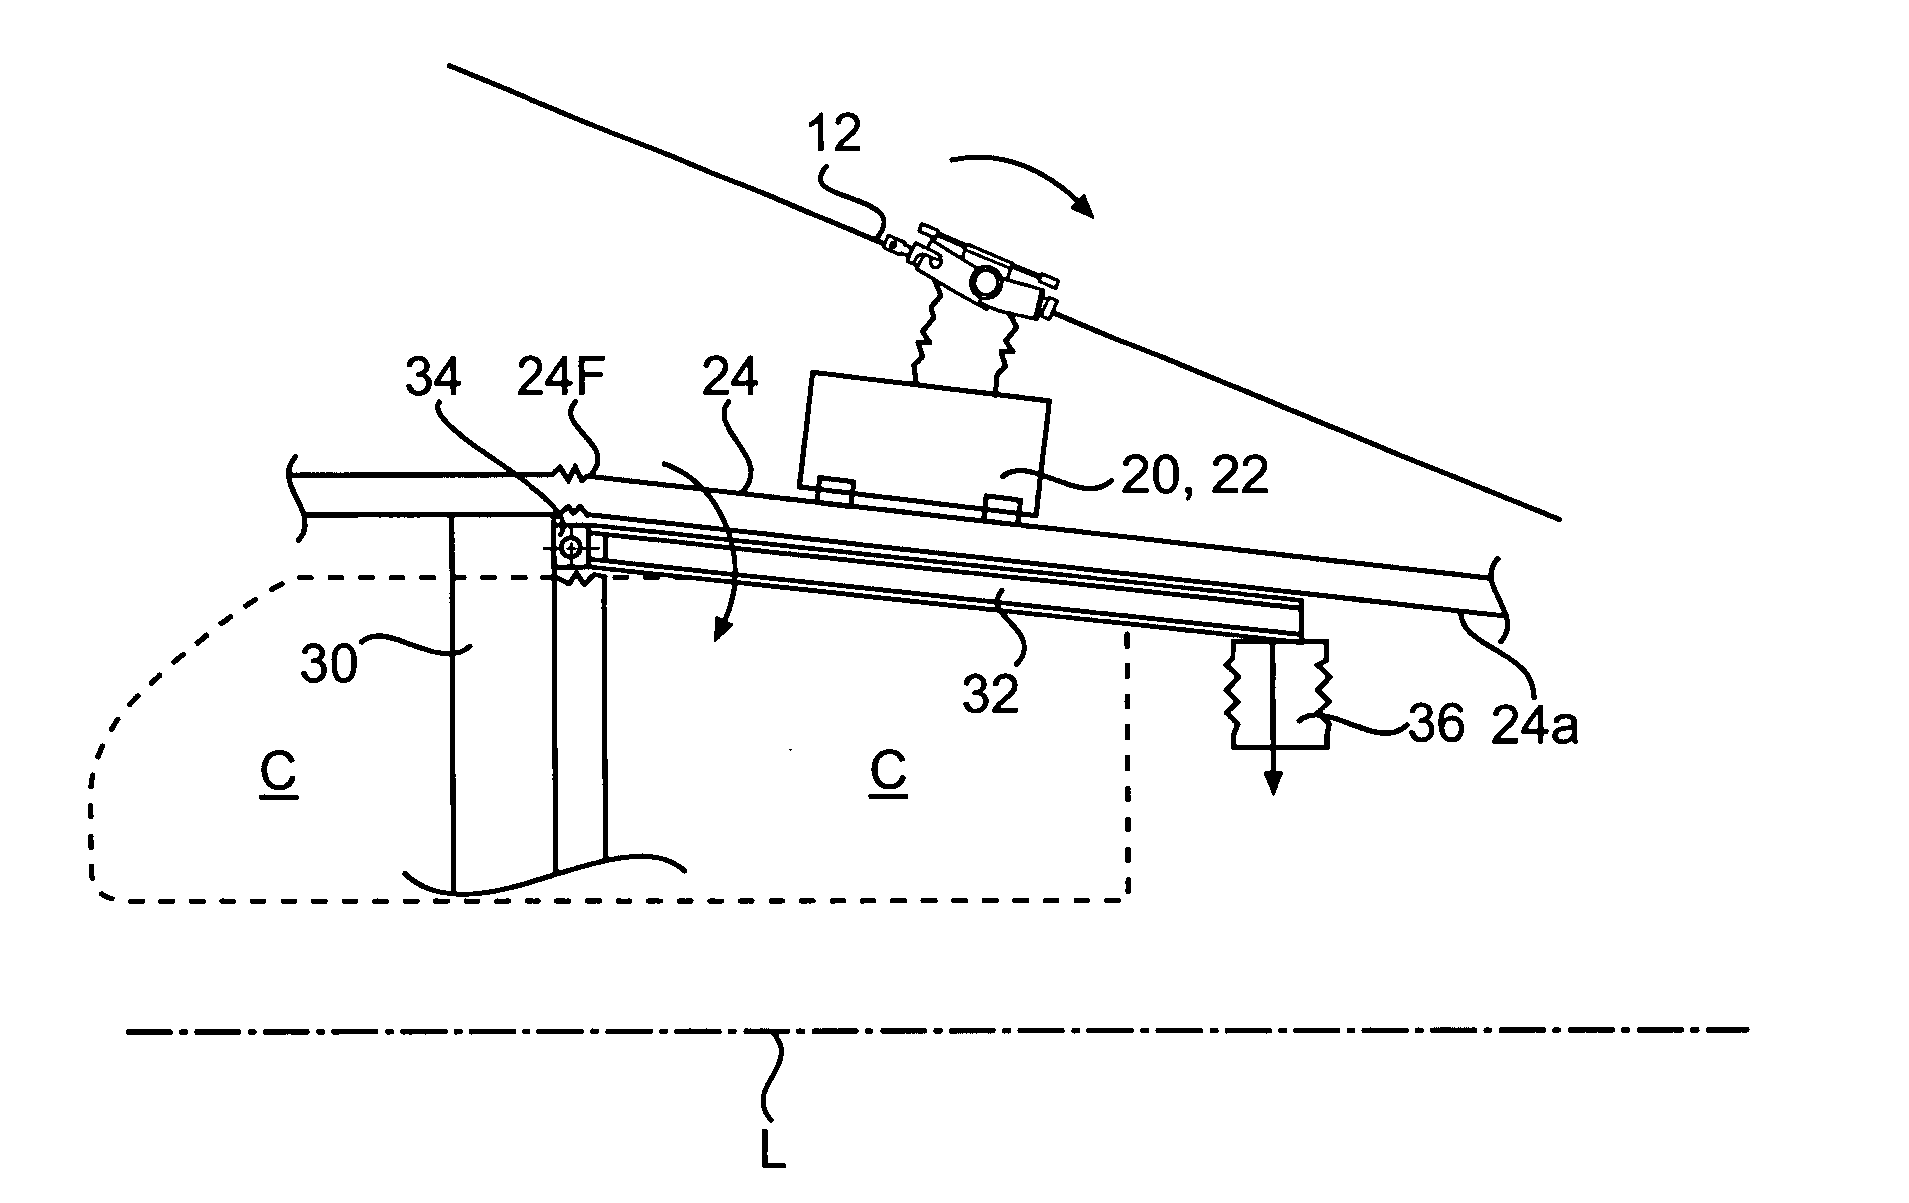 Energy absorbing airframe for a vertical lift vehicle